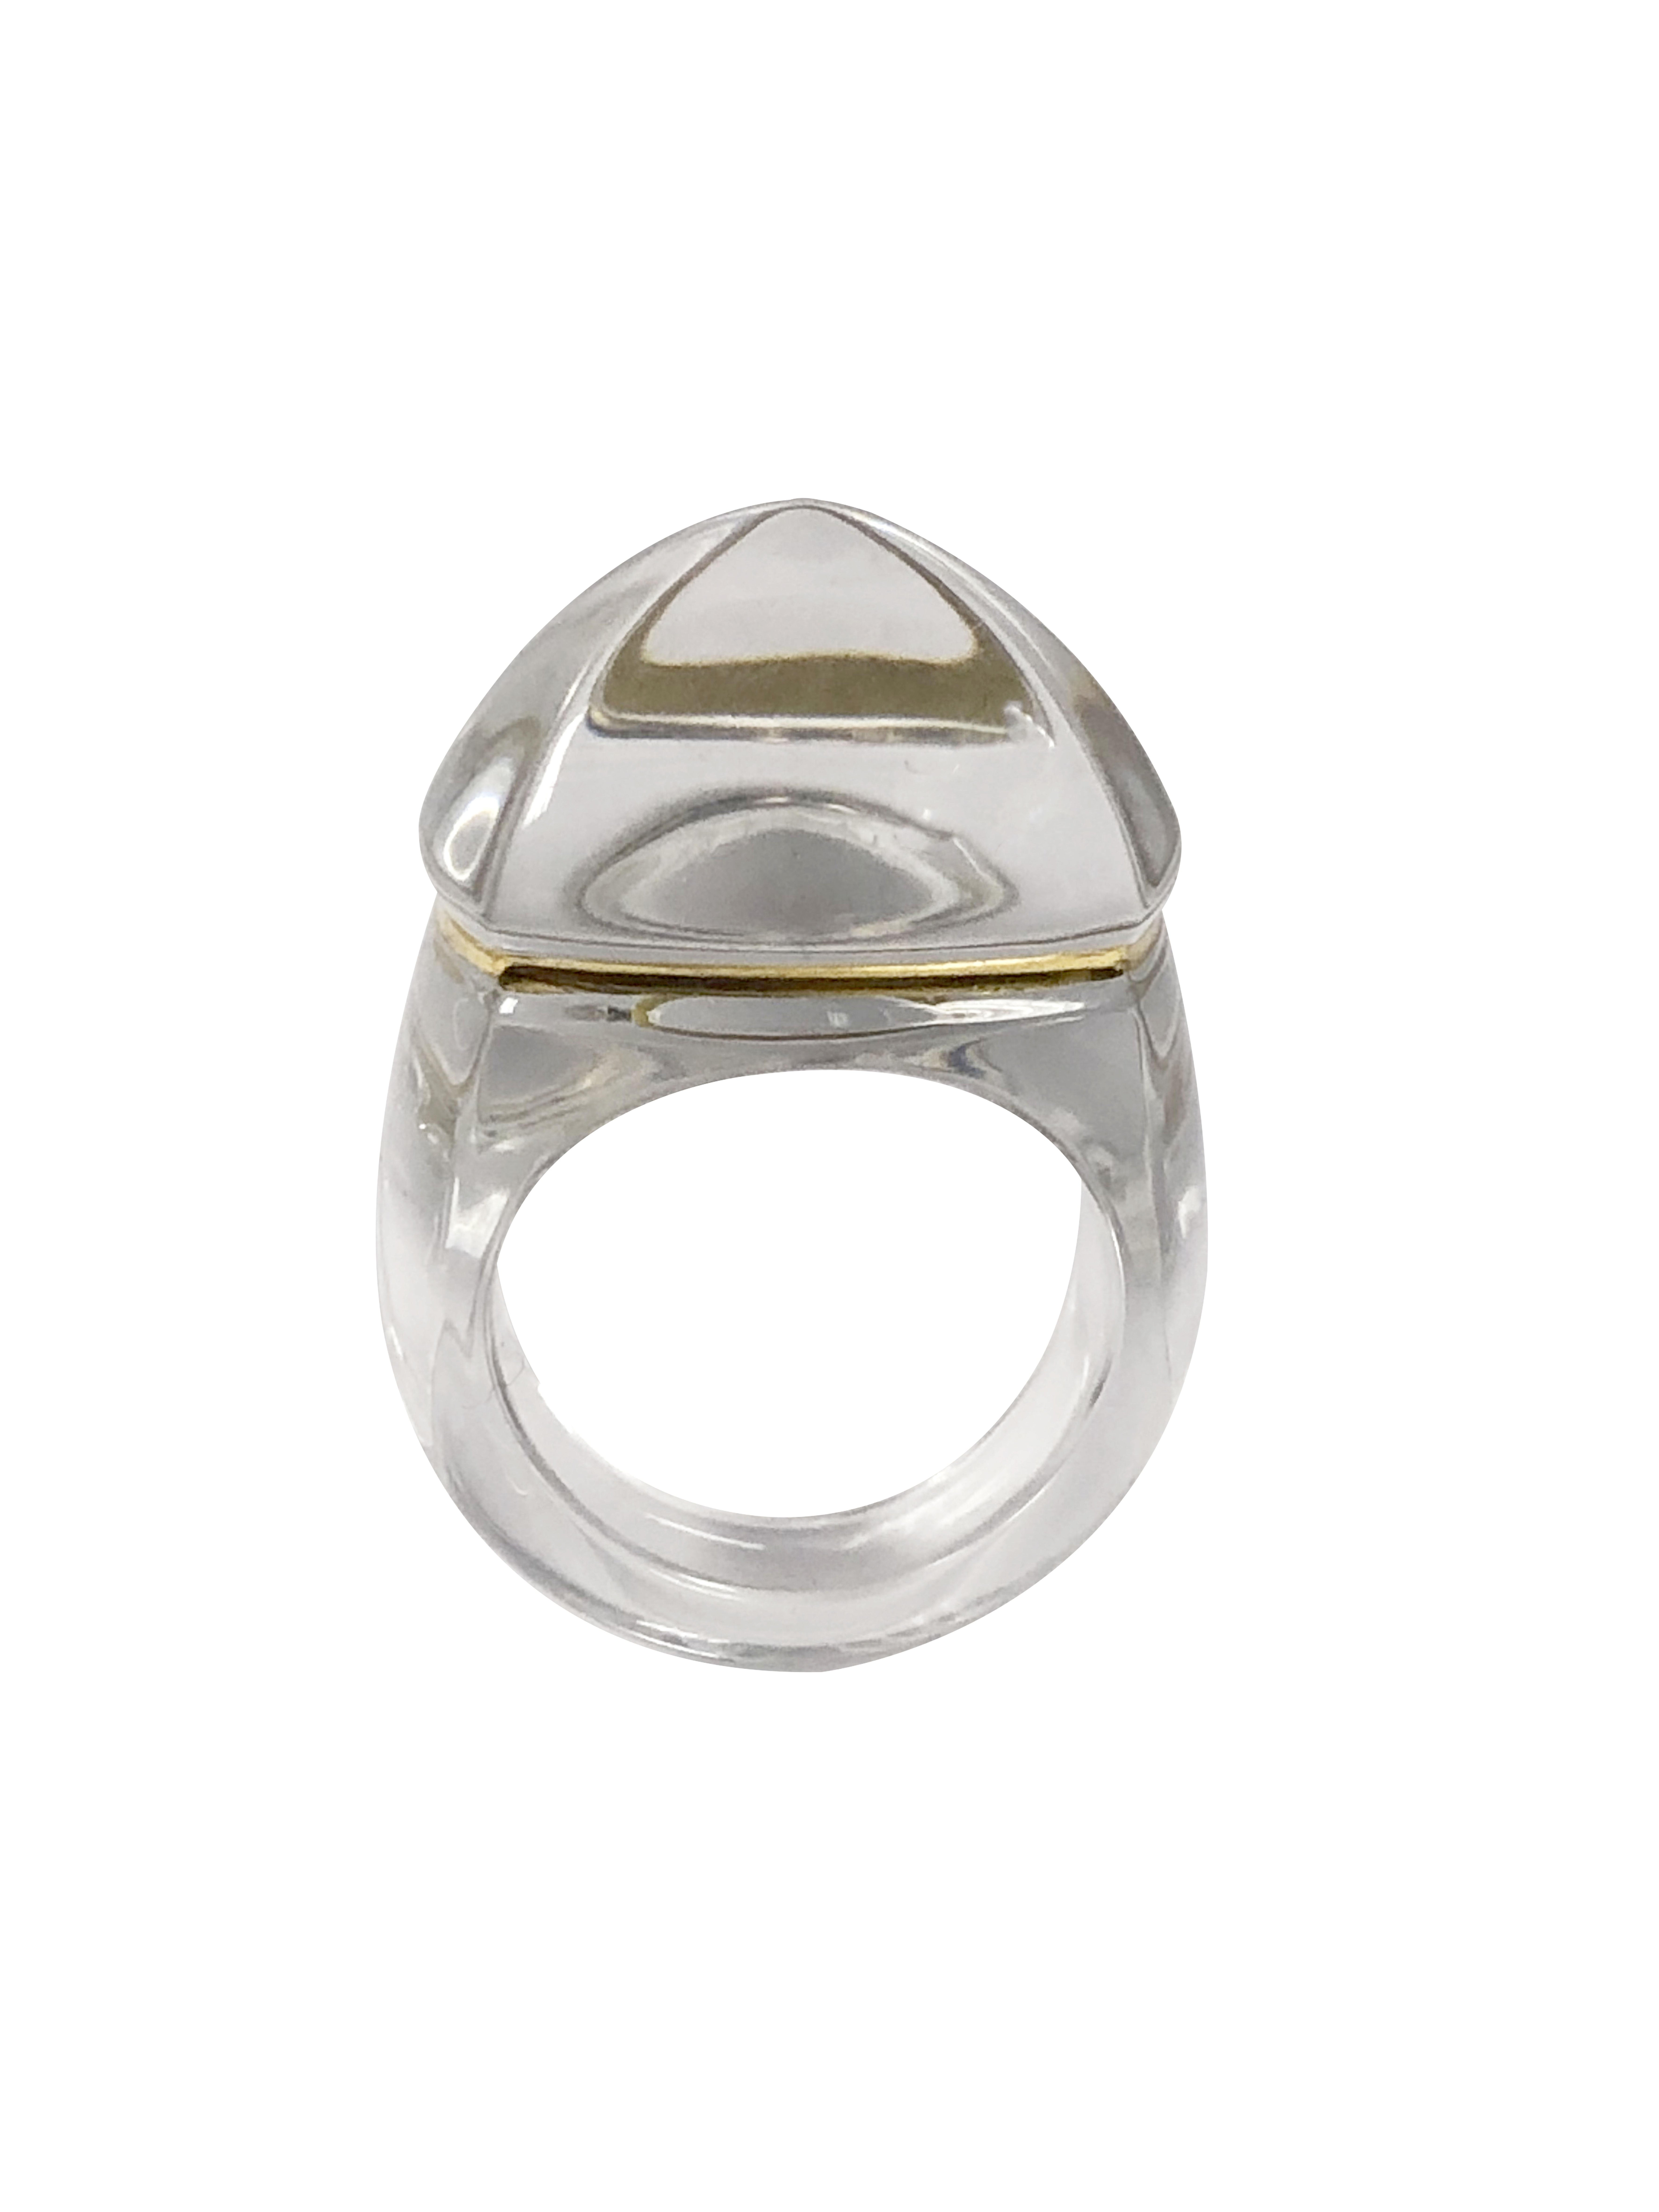 Circa 2010 Baccarat Les Bijoux, Ring, A solid Rock Crystal Ring with a Sugar Loaf, Pyramid Domed top measuring 3/4 X 3/4 inch, a gold band between the top and bottom sections of the ring. Finger size 8.  This ring is new, never worn and comes in the